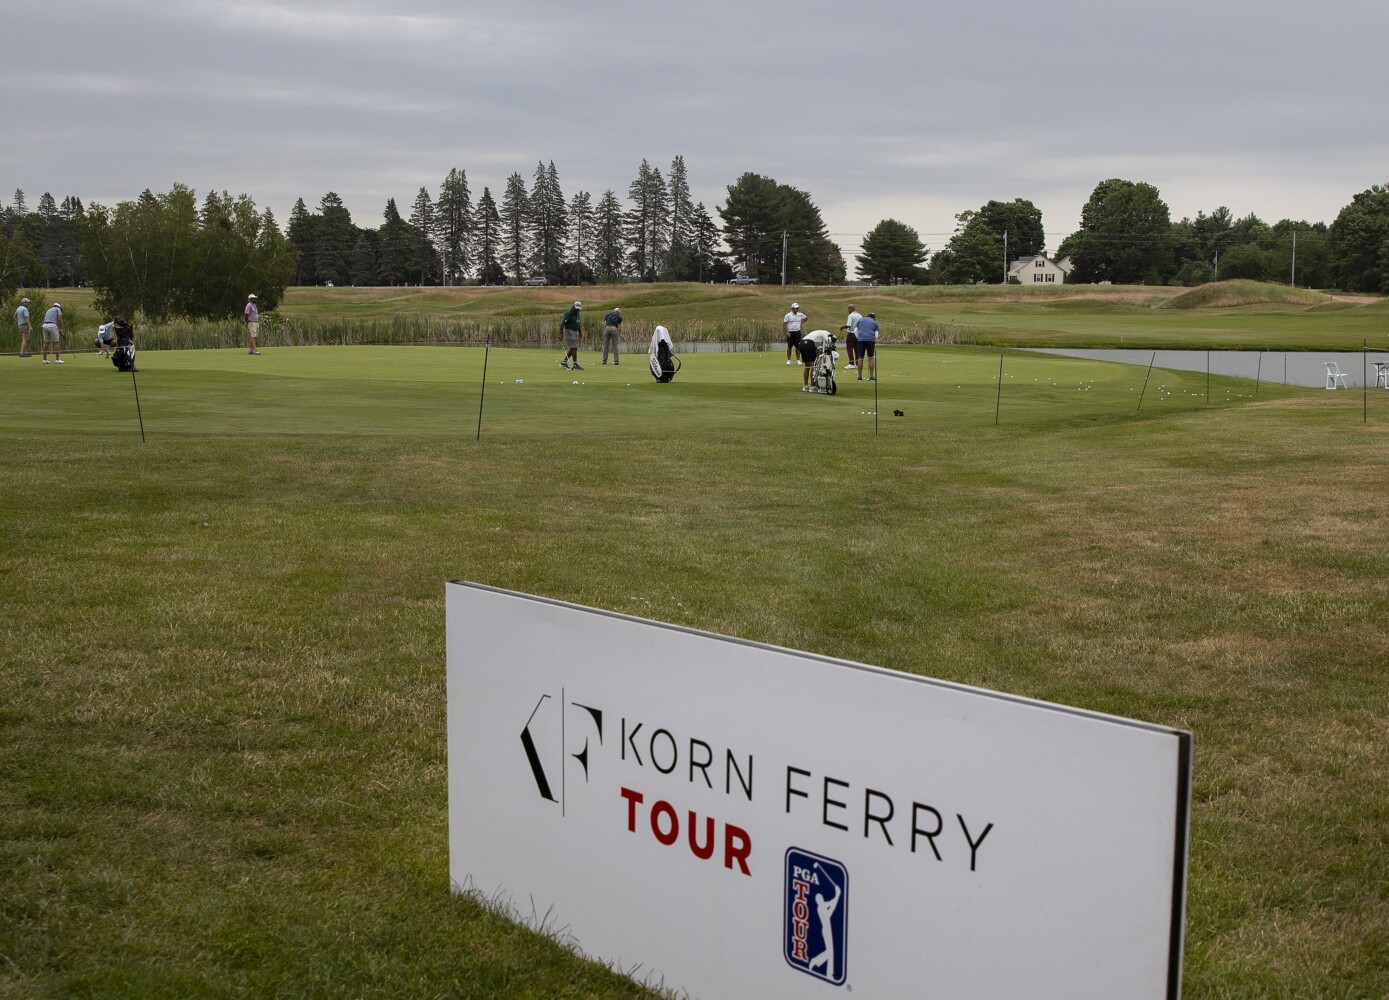 Korn Ferry Tour golfers credit driving distance as a key to success